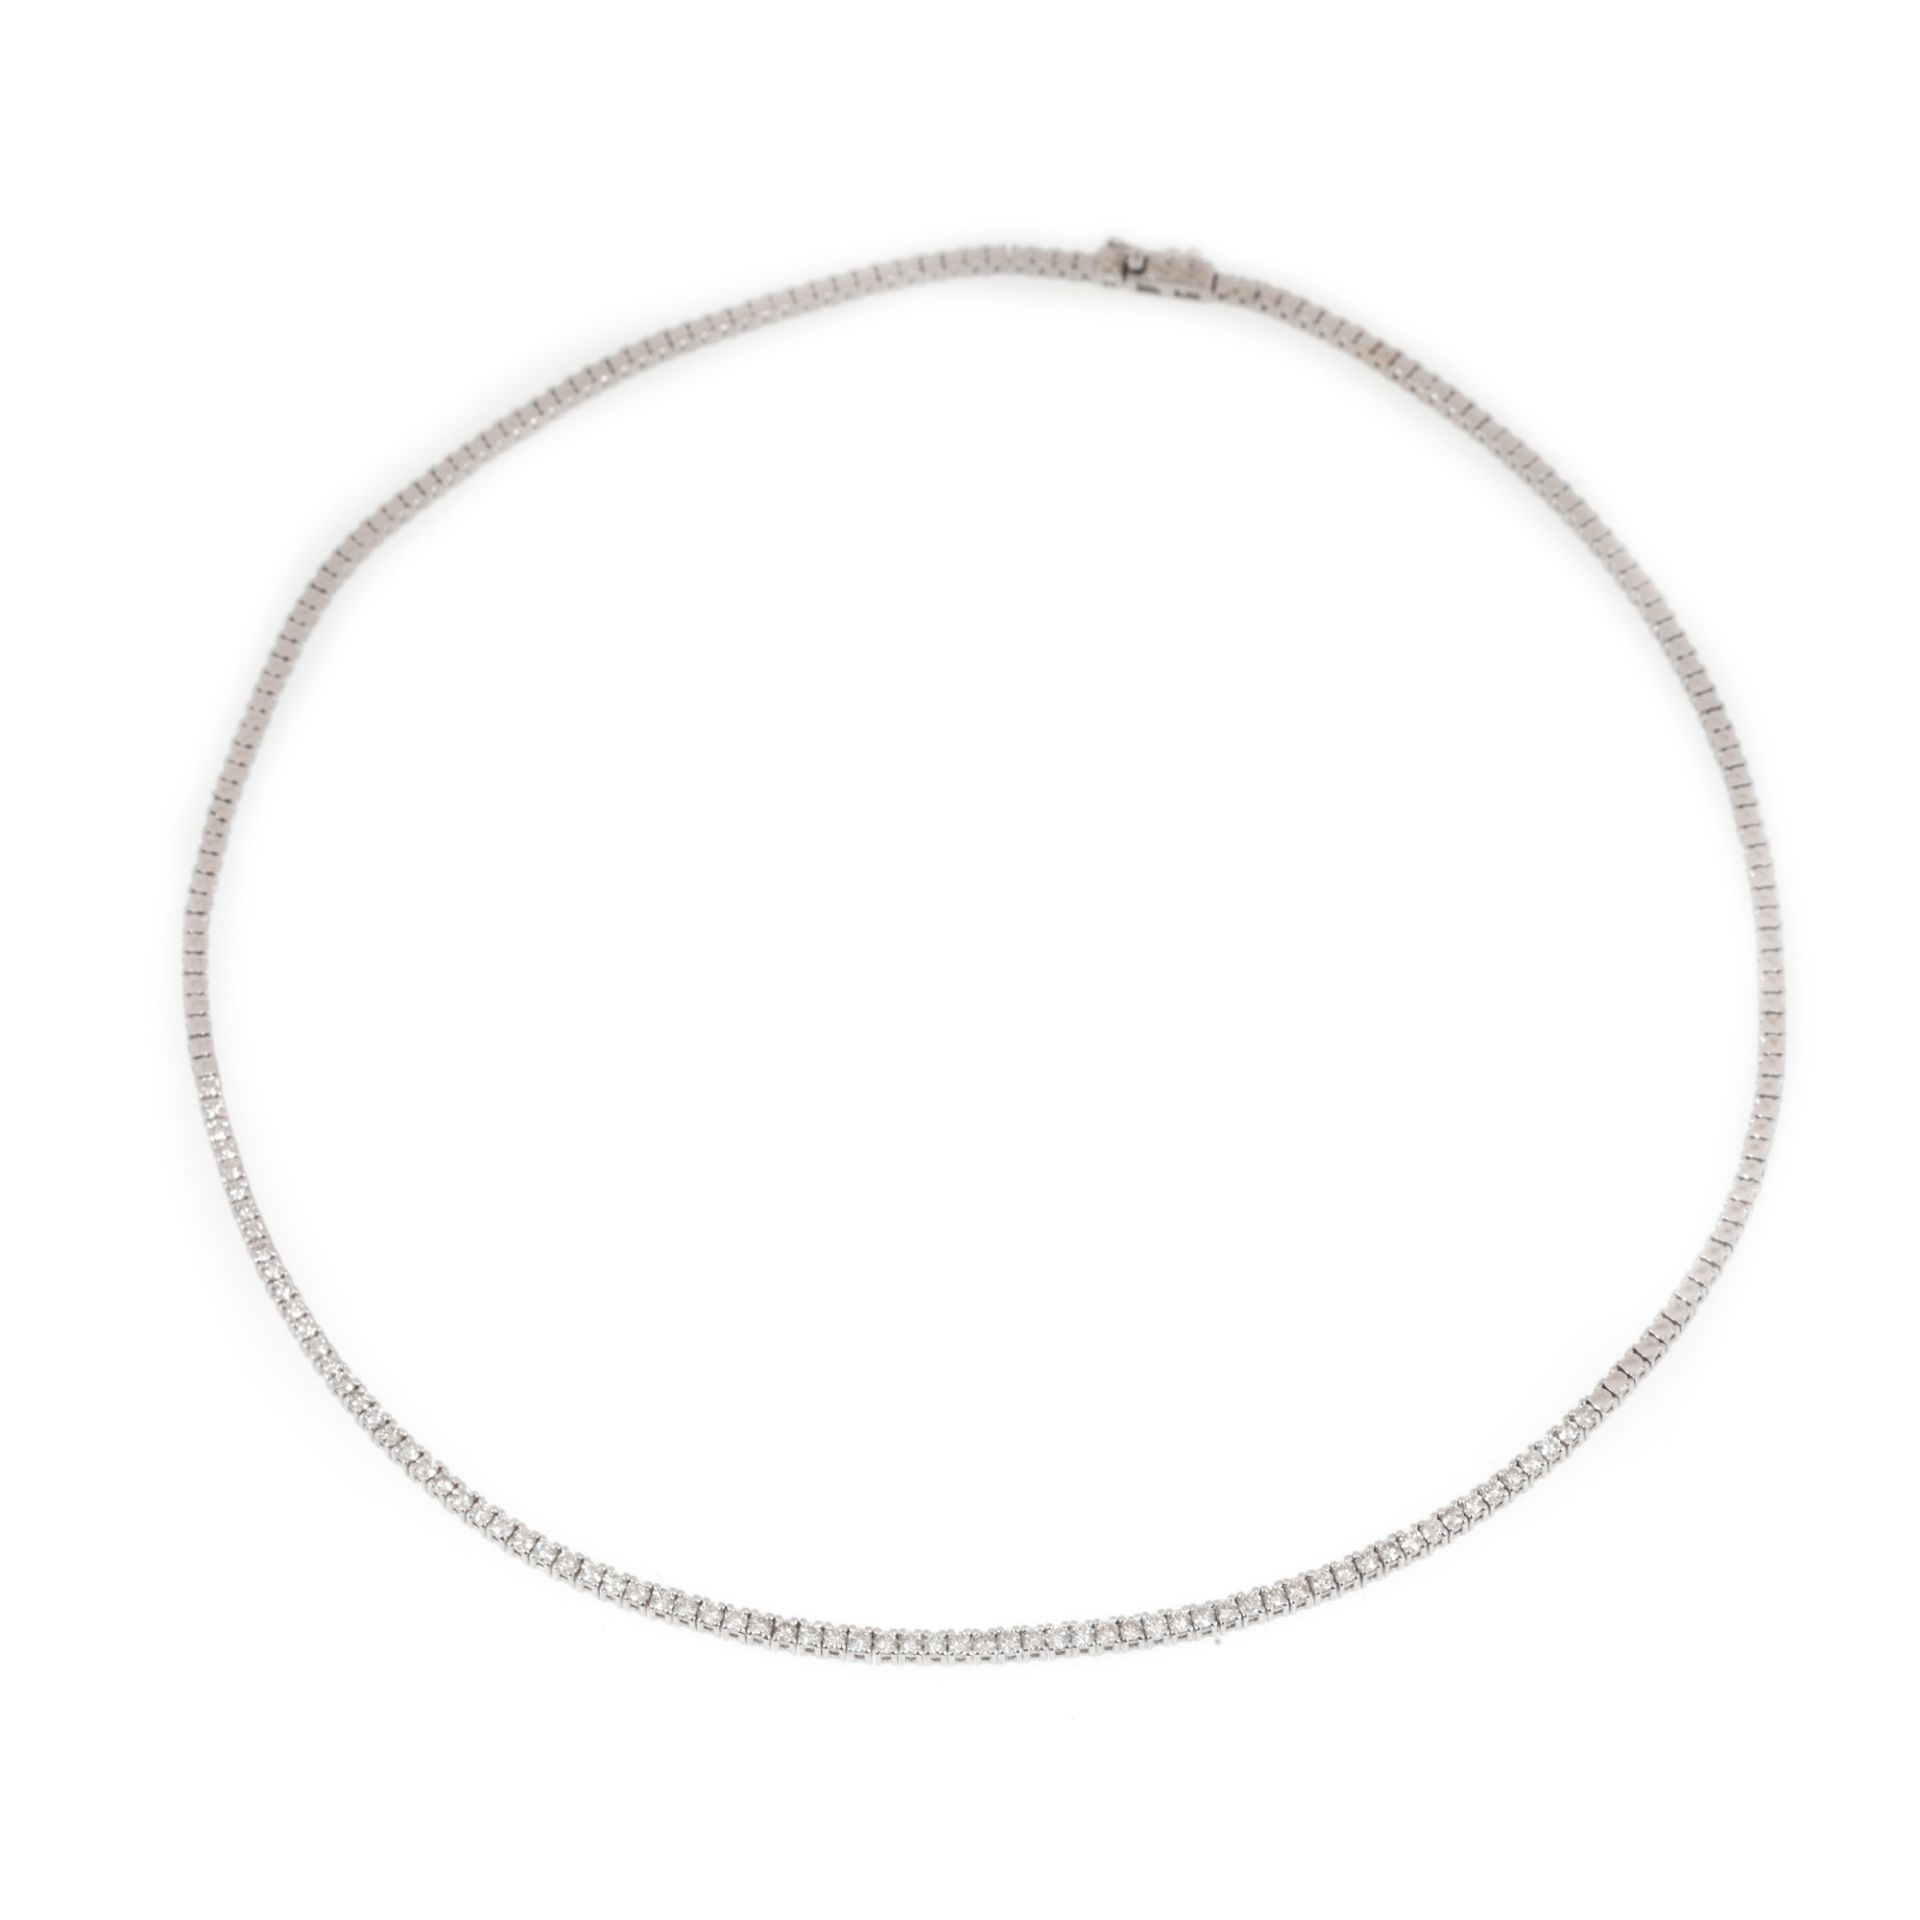 White gold tennis necklace, paved with diamonds